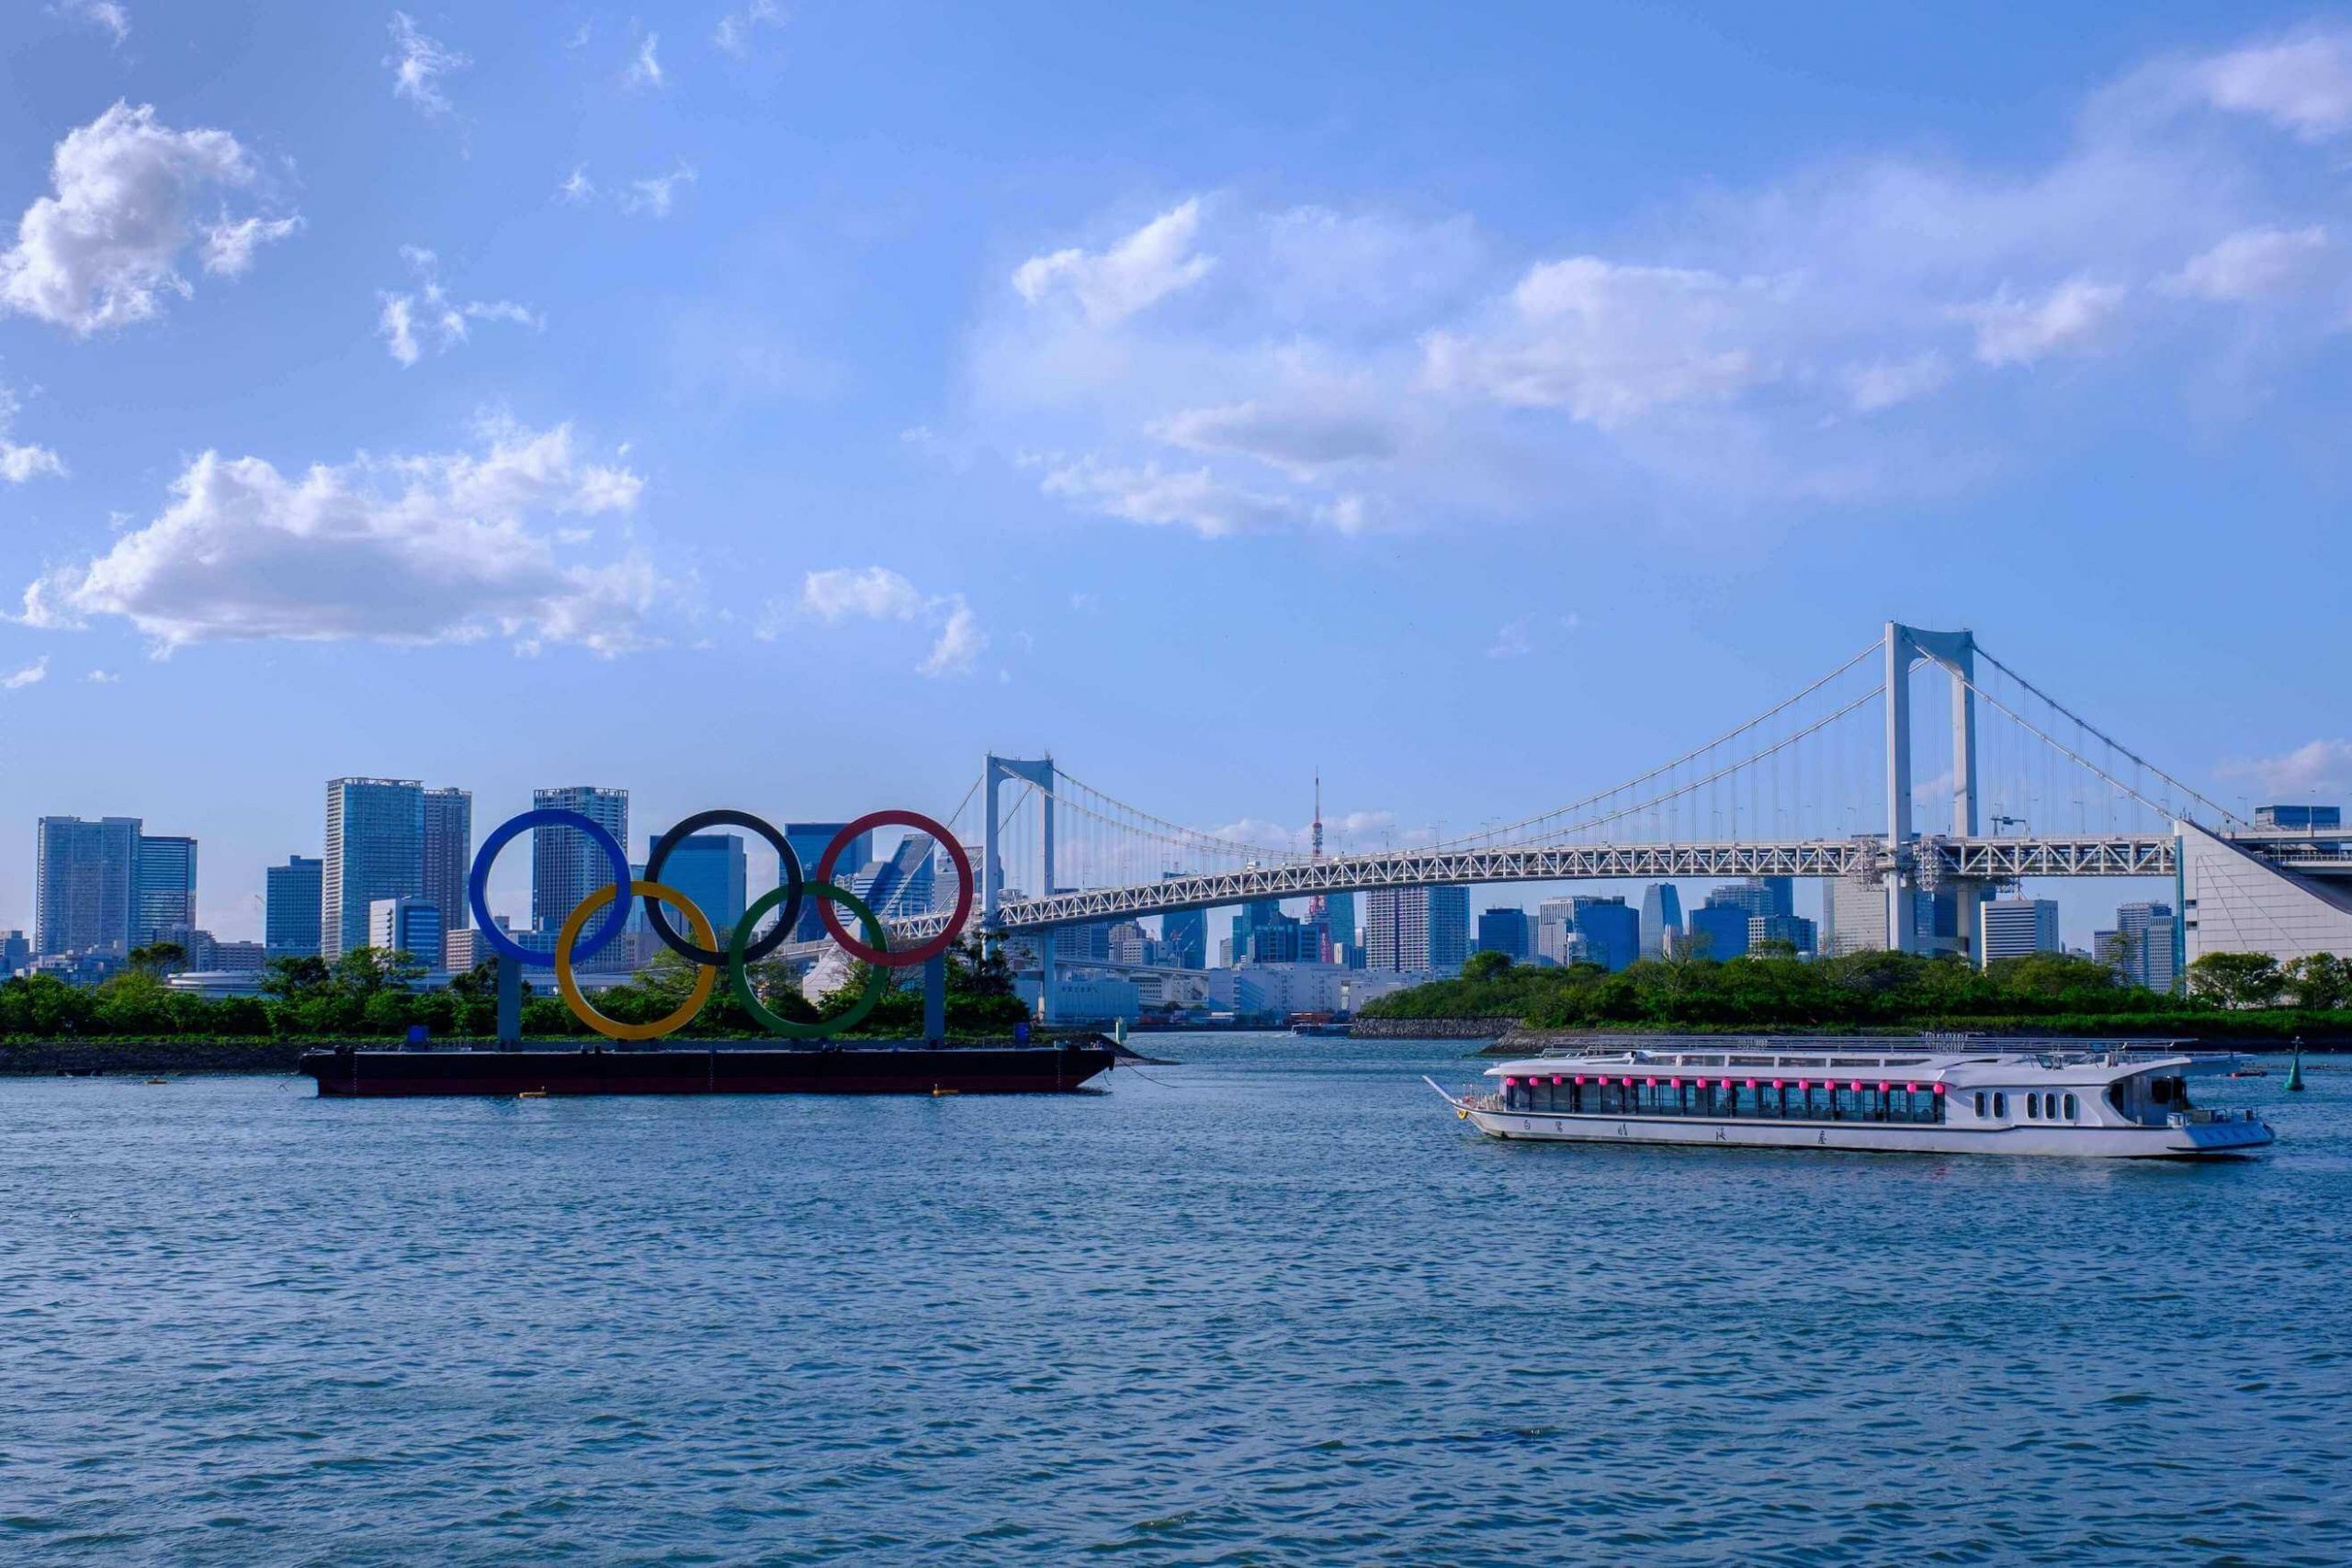 The Olympic Rings in Tokyo